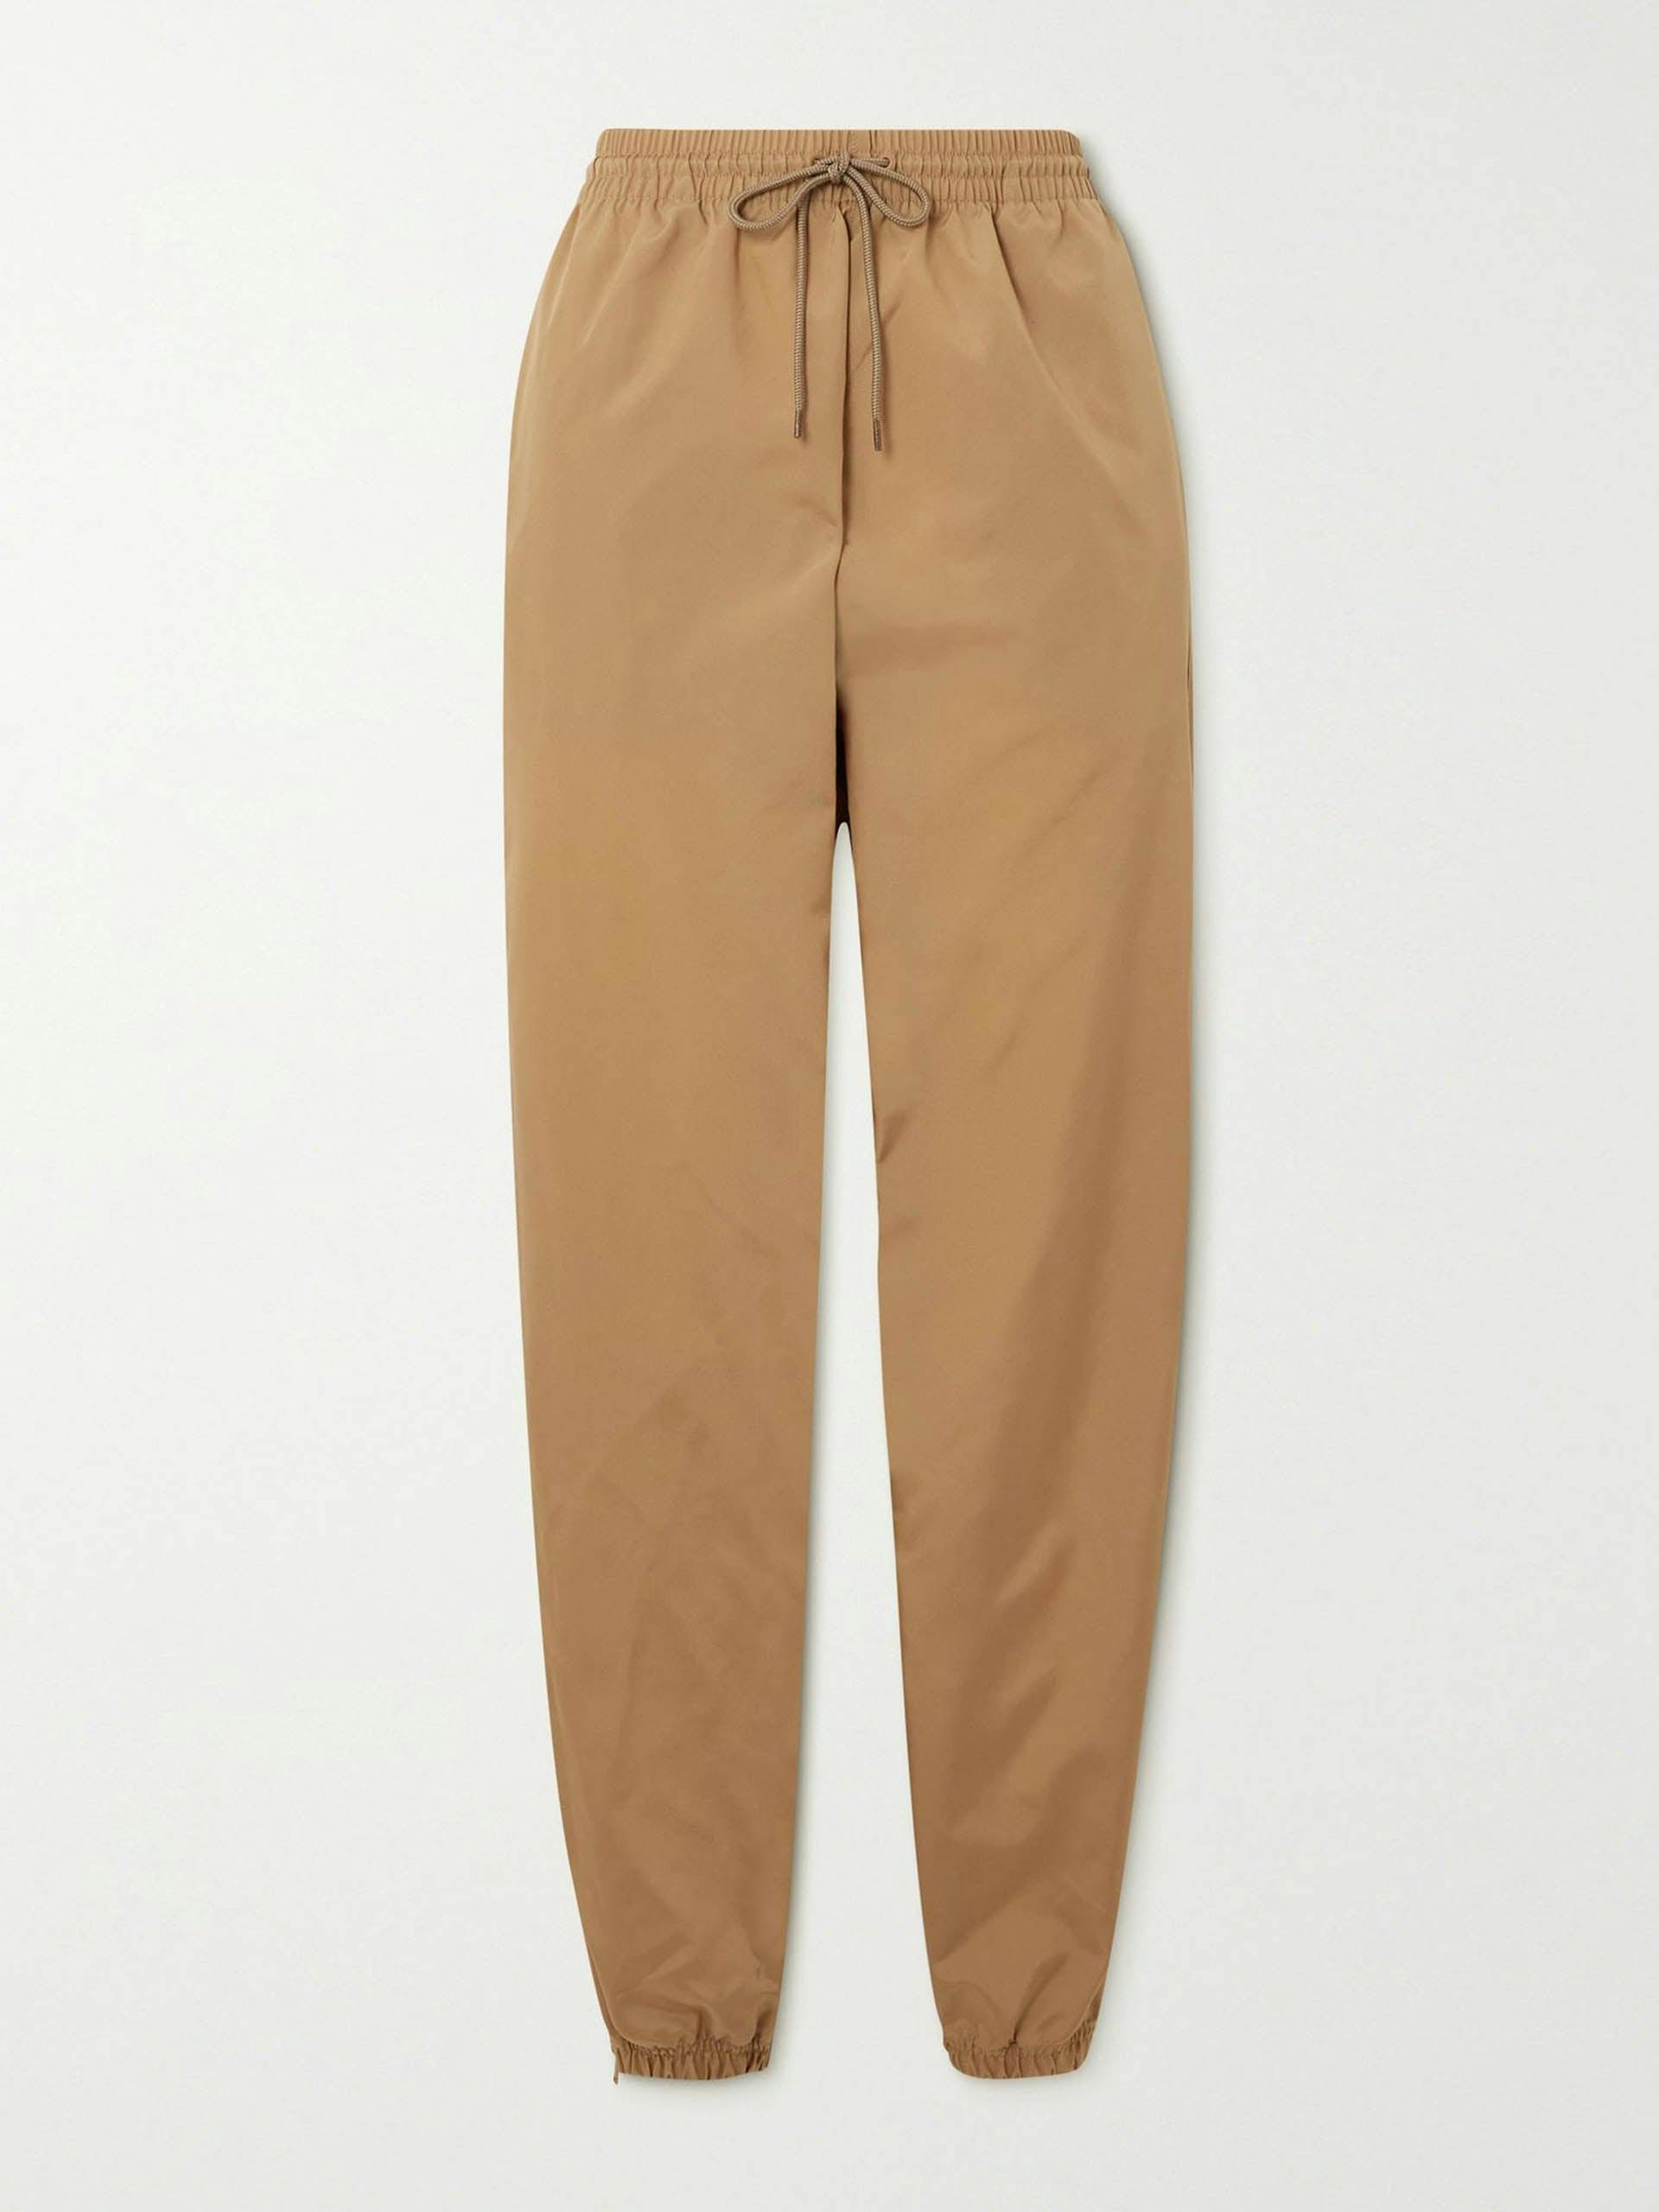 Tan shell tapered track pants